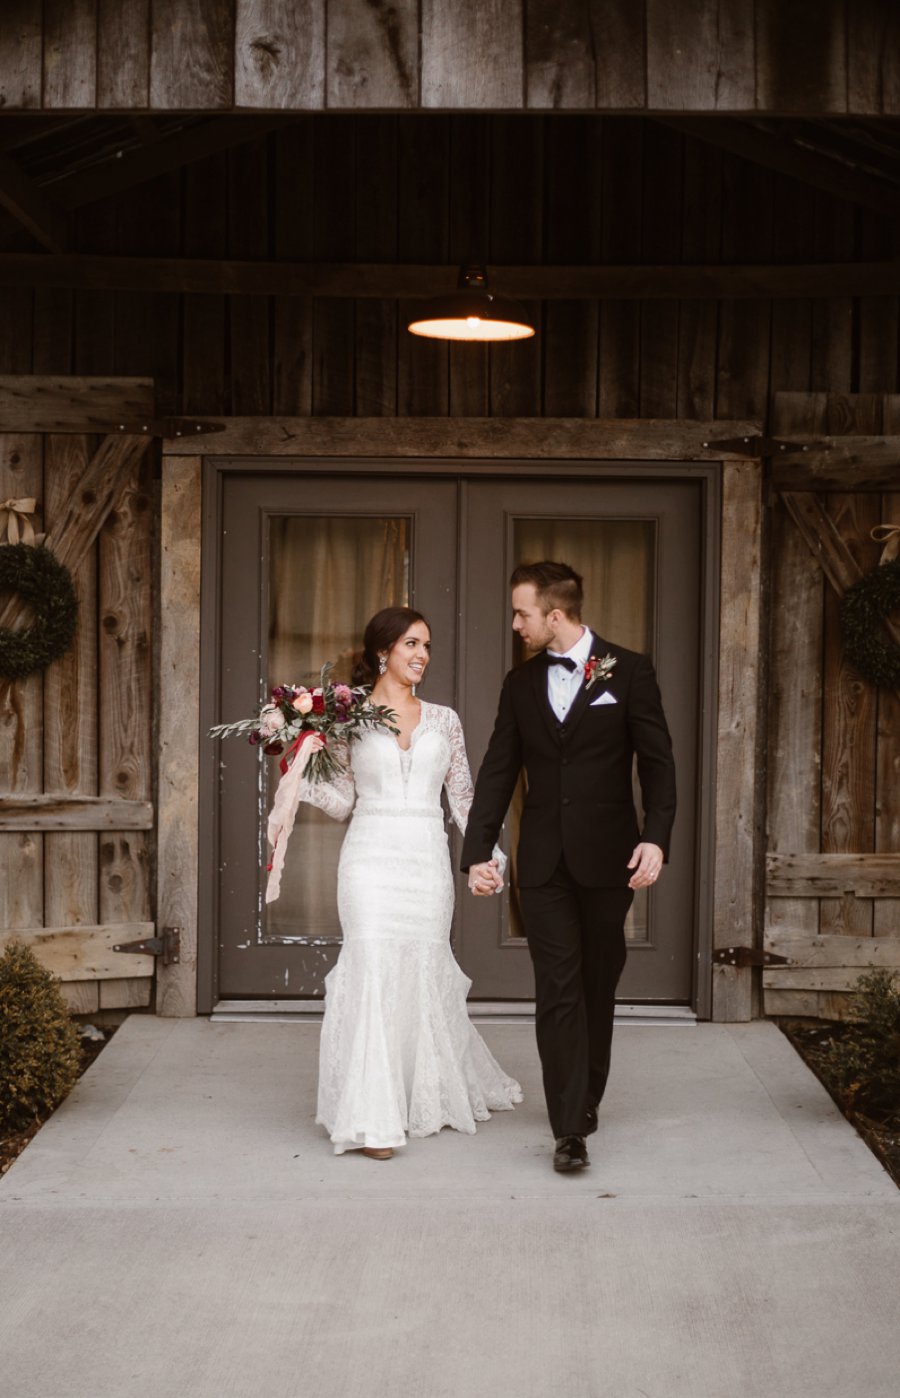 Red and White Rustic Wedding In Tennessee via TheELD.com